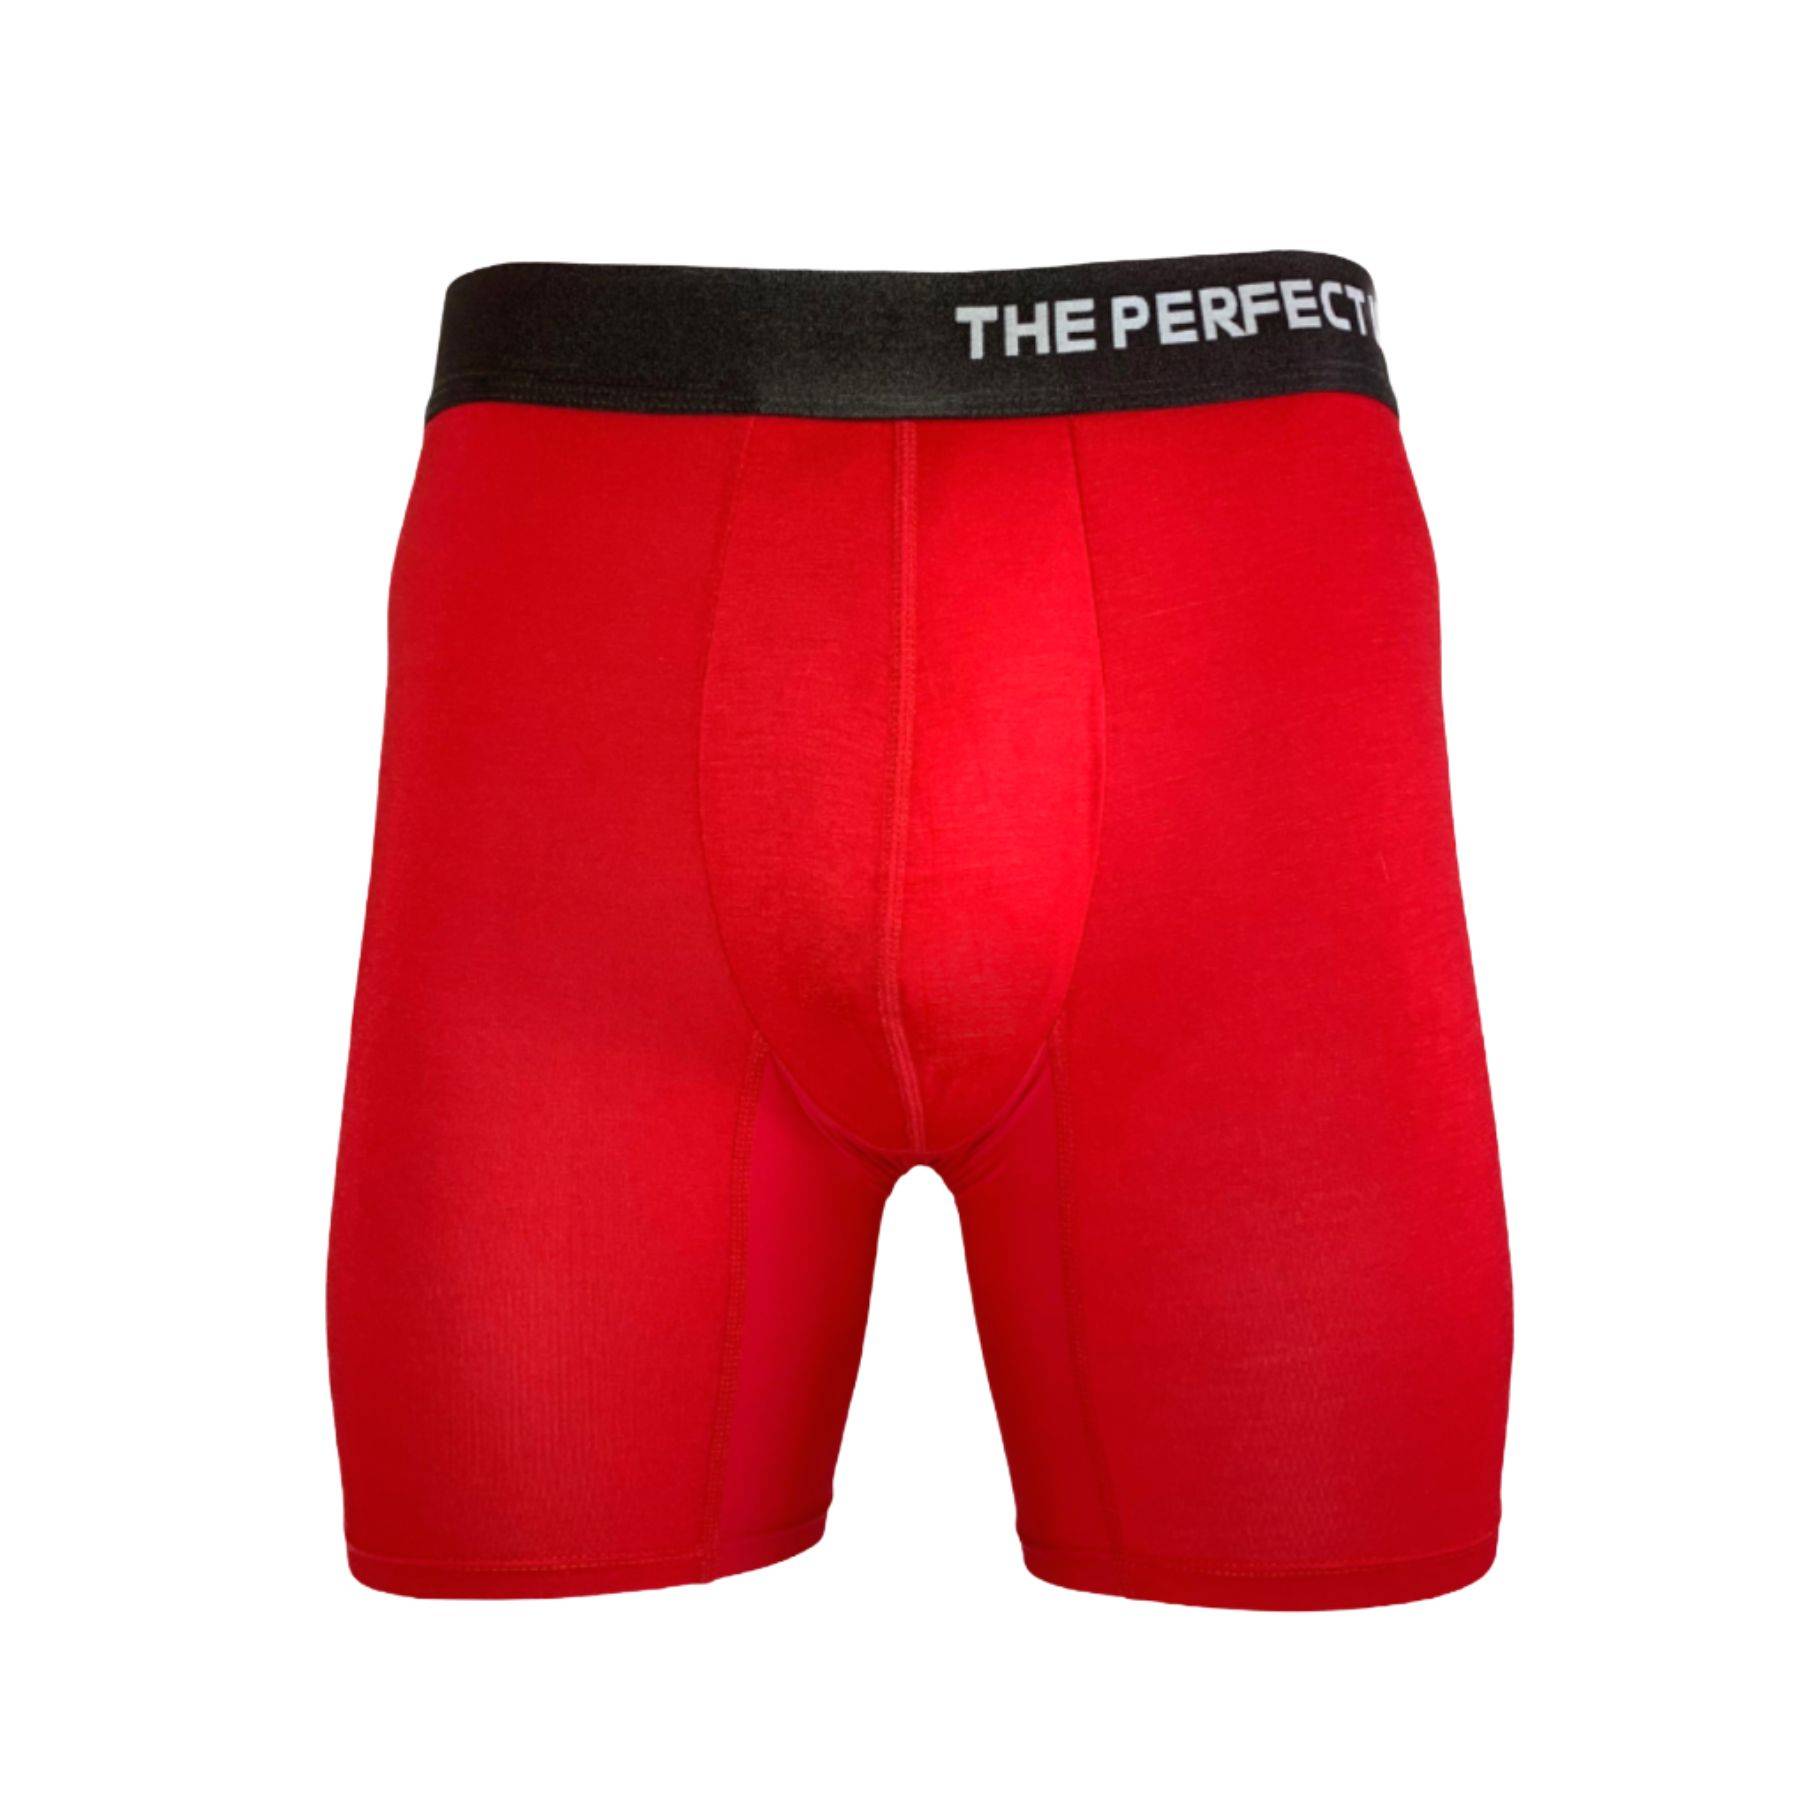 The Perfect Underwear - Discover Real Comfort